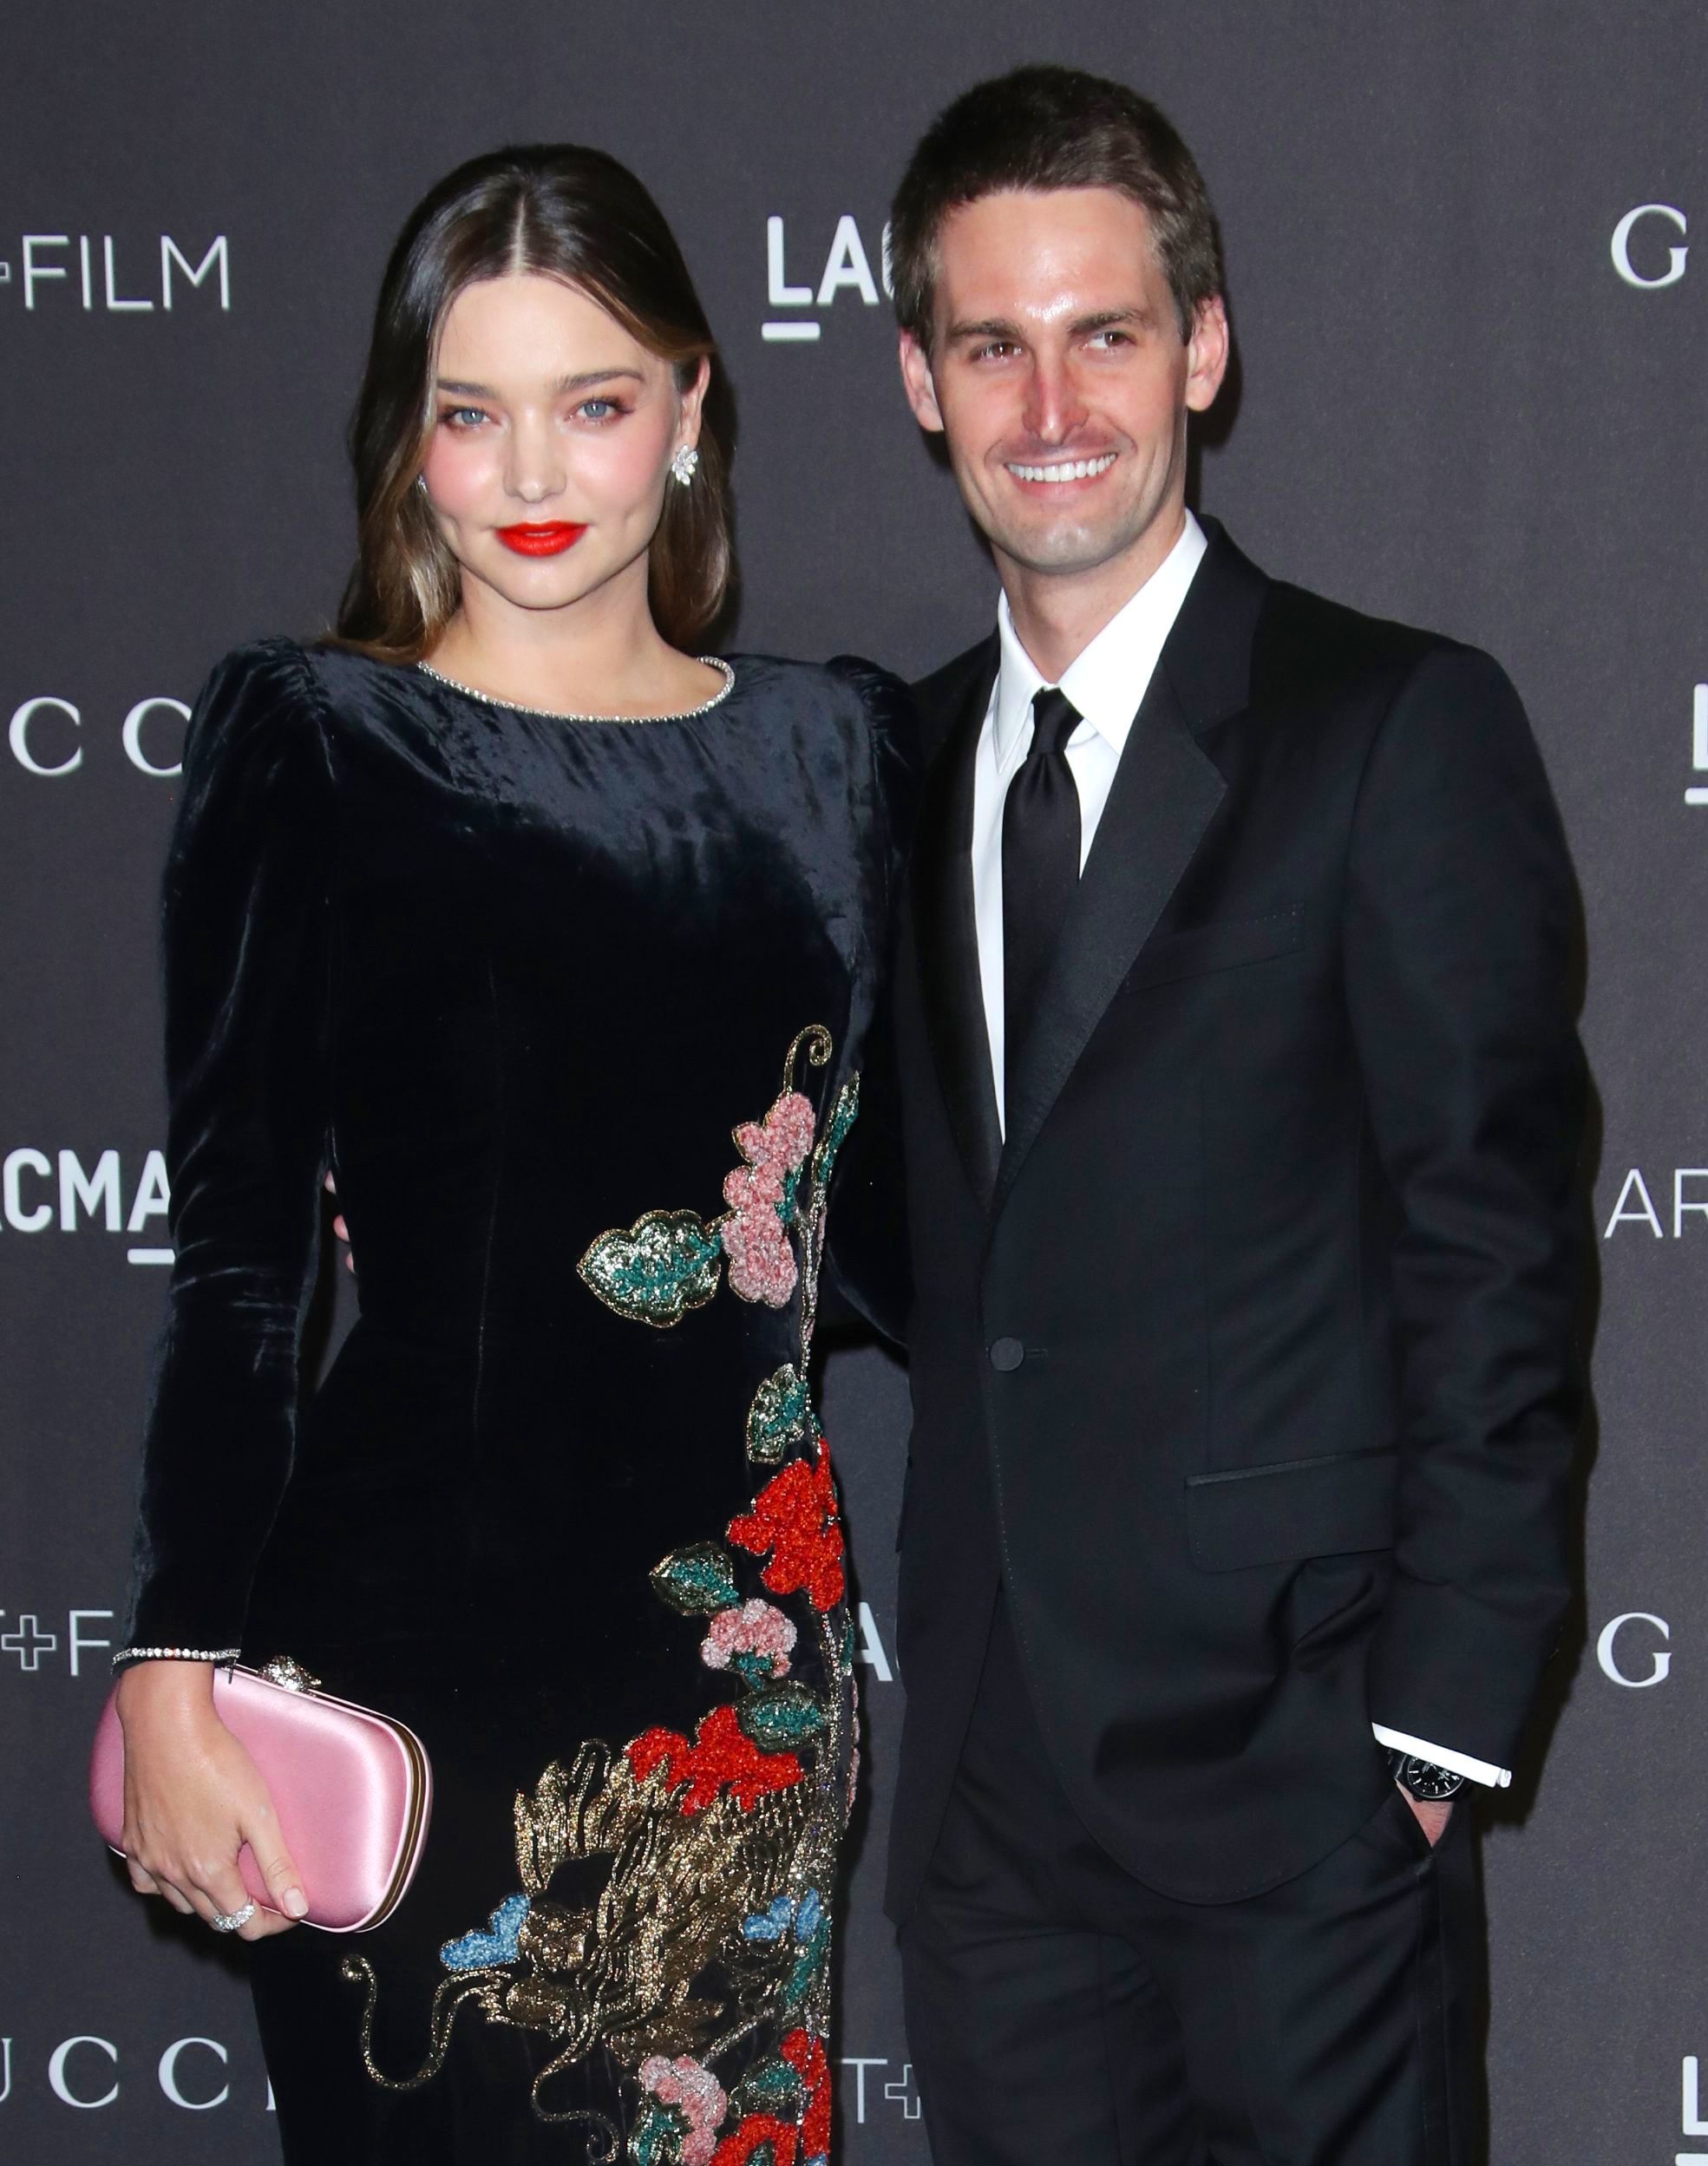 <p>During a joint interview with <a href="https://www.wsj.com/articles/miranda-kerr-evan-spiegel-at-home-photos-profile-11594729523">WSJ Magazine</a> that hit the Internet in July 2020, <a href="https://www.wonderwall.com/celebrity/profiles/overview/miranda-kerr-1272.article">Miranda Kerr</a> and <a href="https://www.wonderwall.com/celebrity/couples/emmy-rossum-got-married-plus-more-romance-updates-week-3006774.gallery?photoId=1003879">her husband</a>, Evan Spiegel, dished on how they first met at a 2014 Louis Vuitton event in New York City -- and how the supermodel made the first move with the Snapchat co-founder. The duo were seated next to each other at the party, and Miranda started chatting him up. Eventually, they exchanged numbers -- but then he abruptly left. When the former Victoria's Secret Angel still hadn't heard from Evan after a month passed, she hit him up. "I thought I had no chance [with her], so I wasn't going to waste my time," he explained.</p>